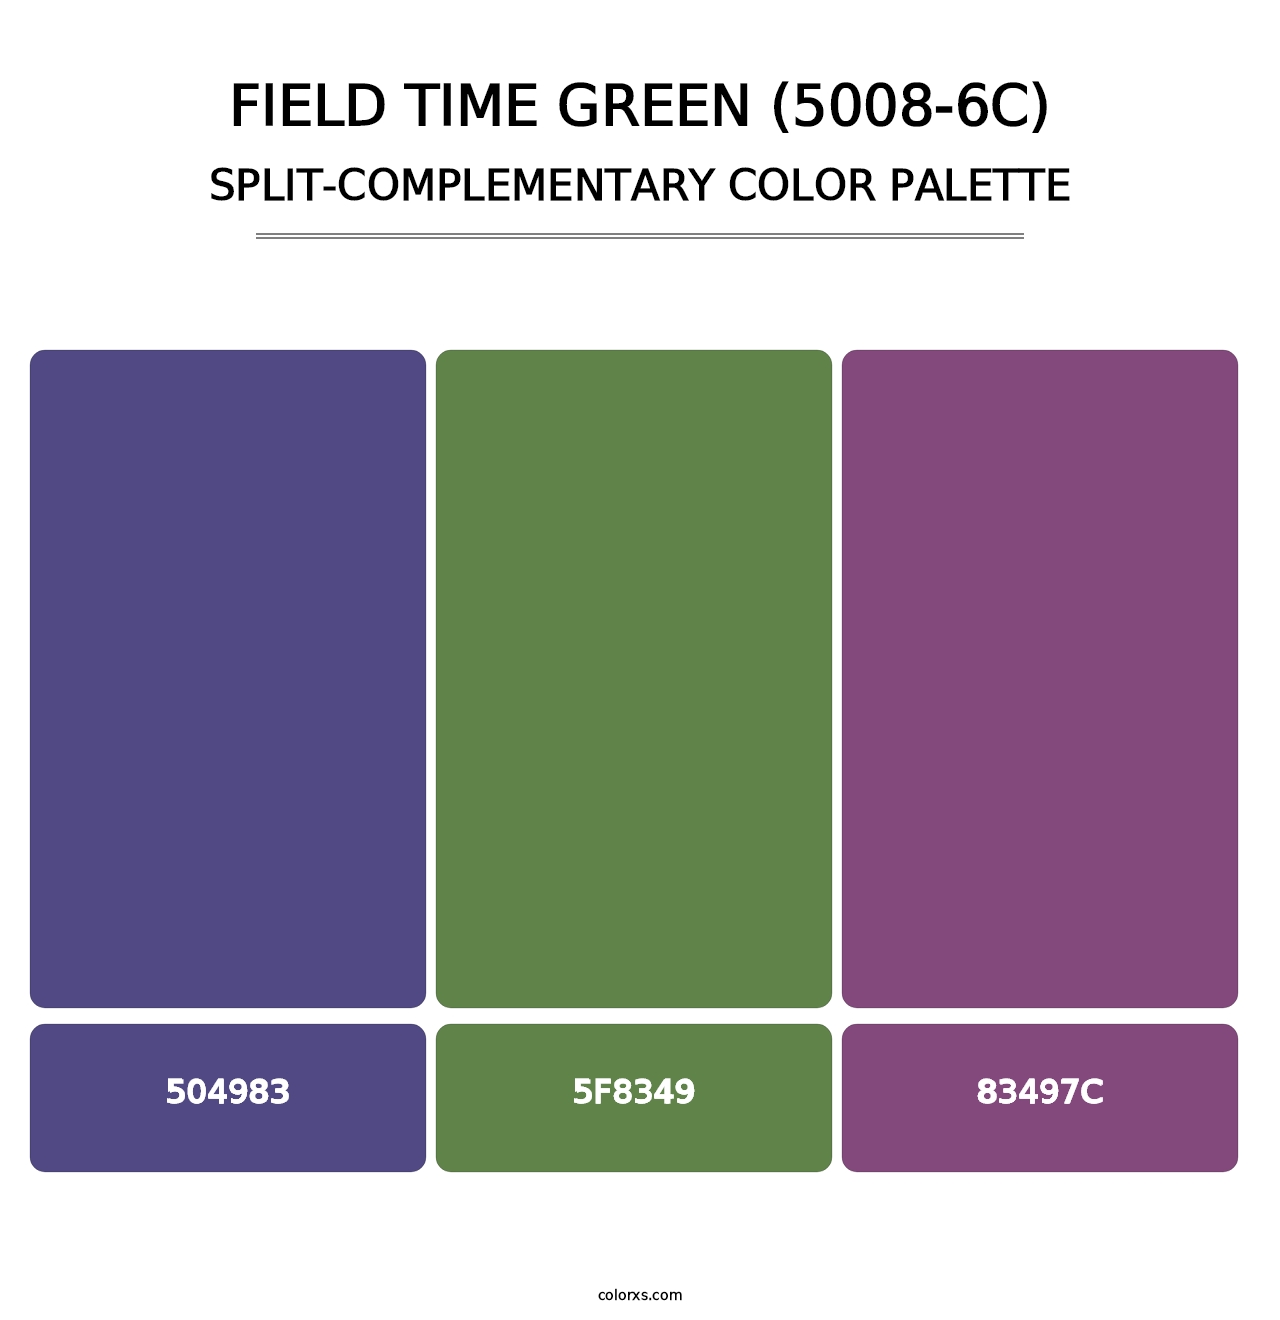 Field Time Green (5008-6C) - Split-Complementary Color Palette